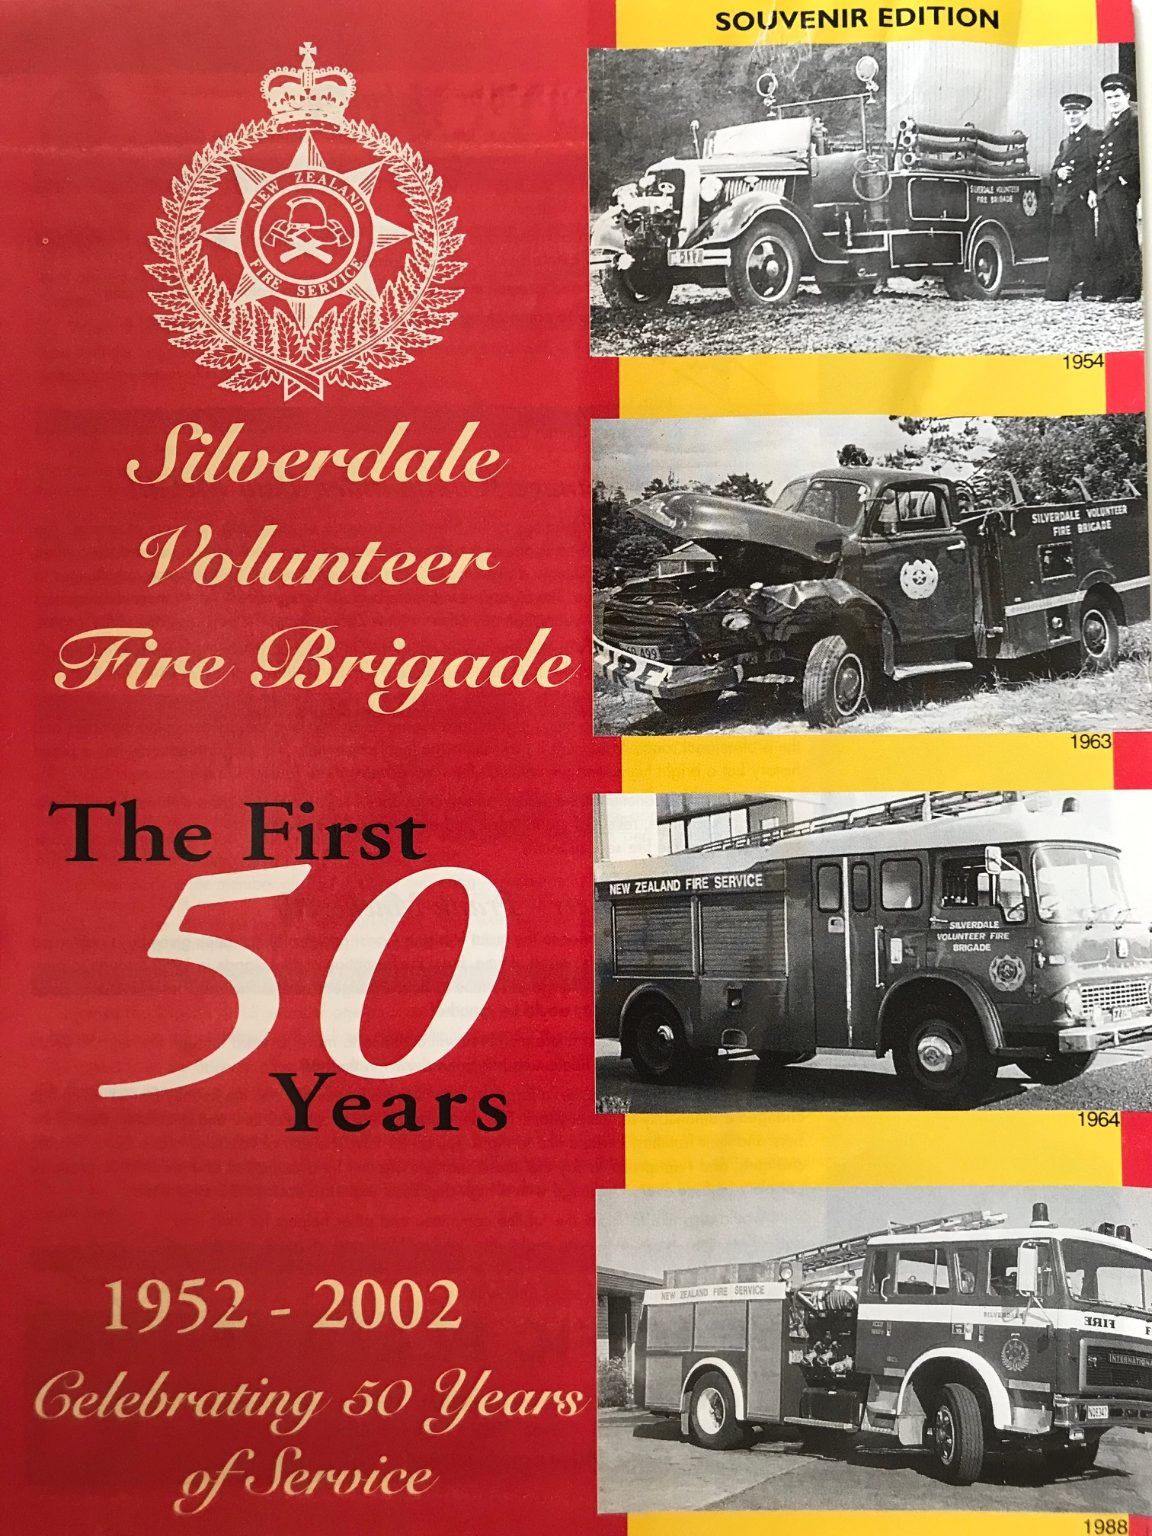 SILVERDALE VOLUNTEER FIRE BRIGADE: The First 50 Years 1952-2002